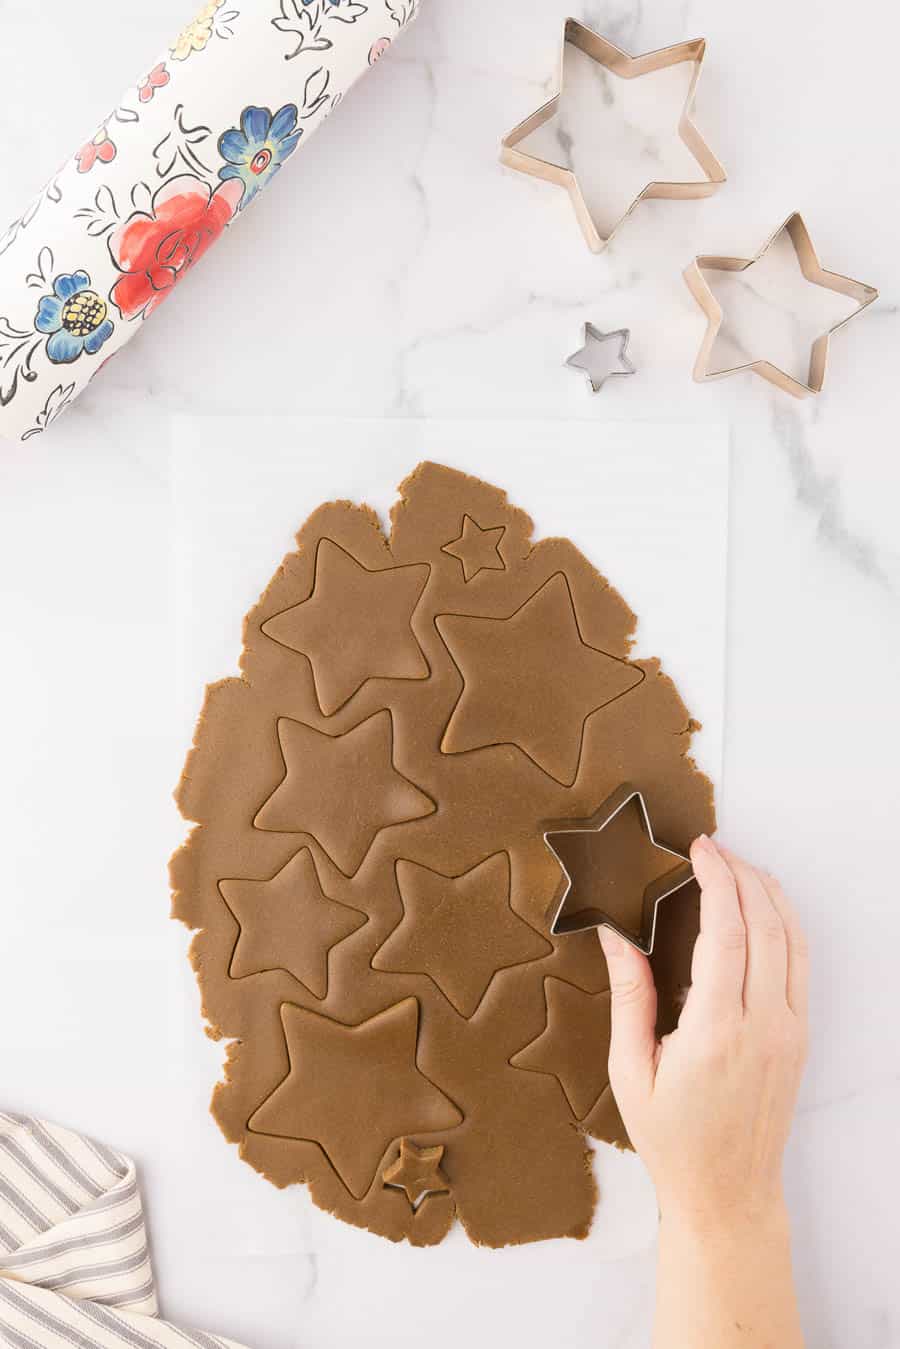 stars of gingerbread being cut with a cookie cutter